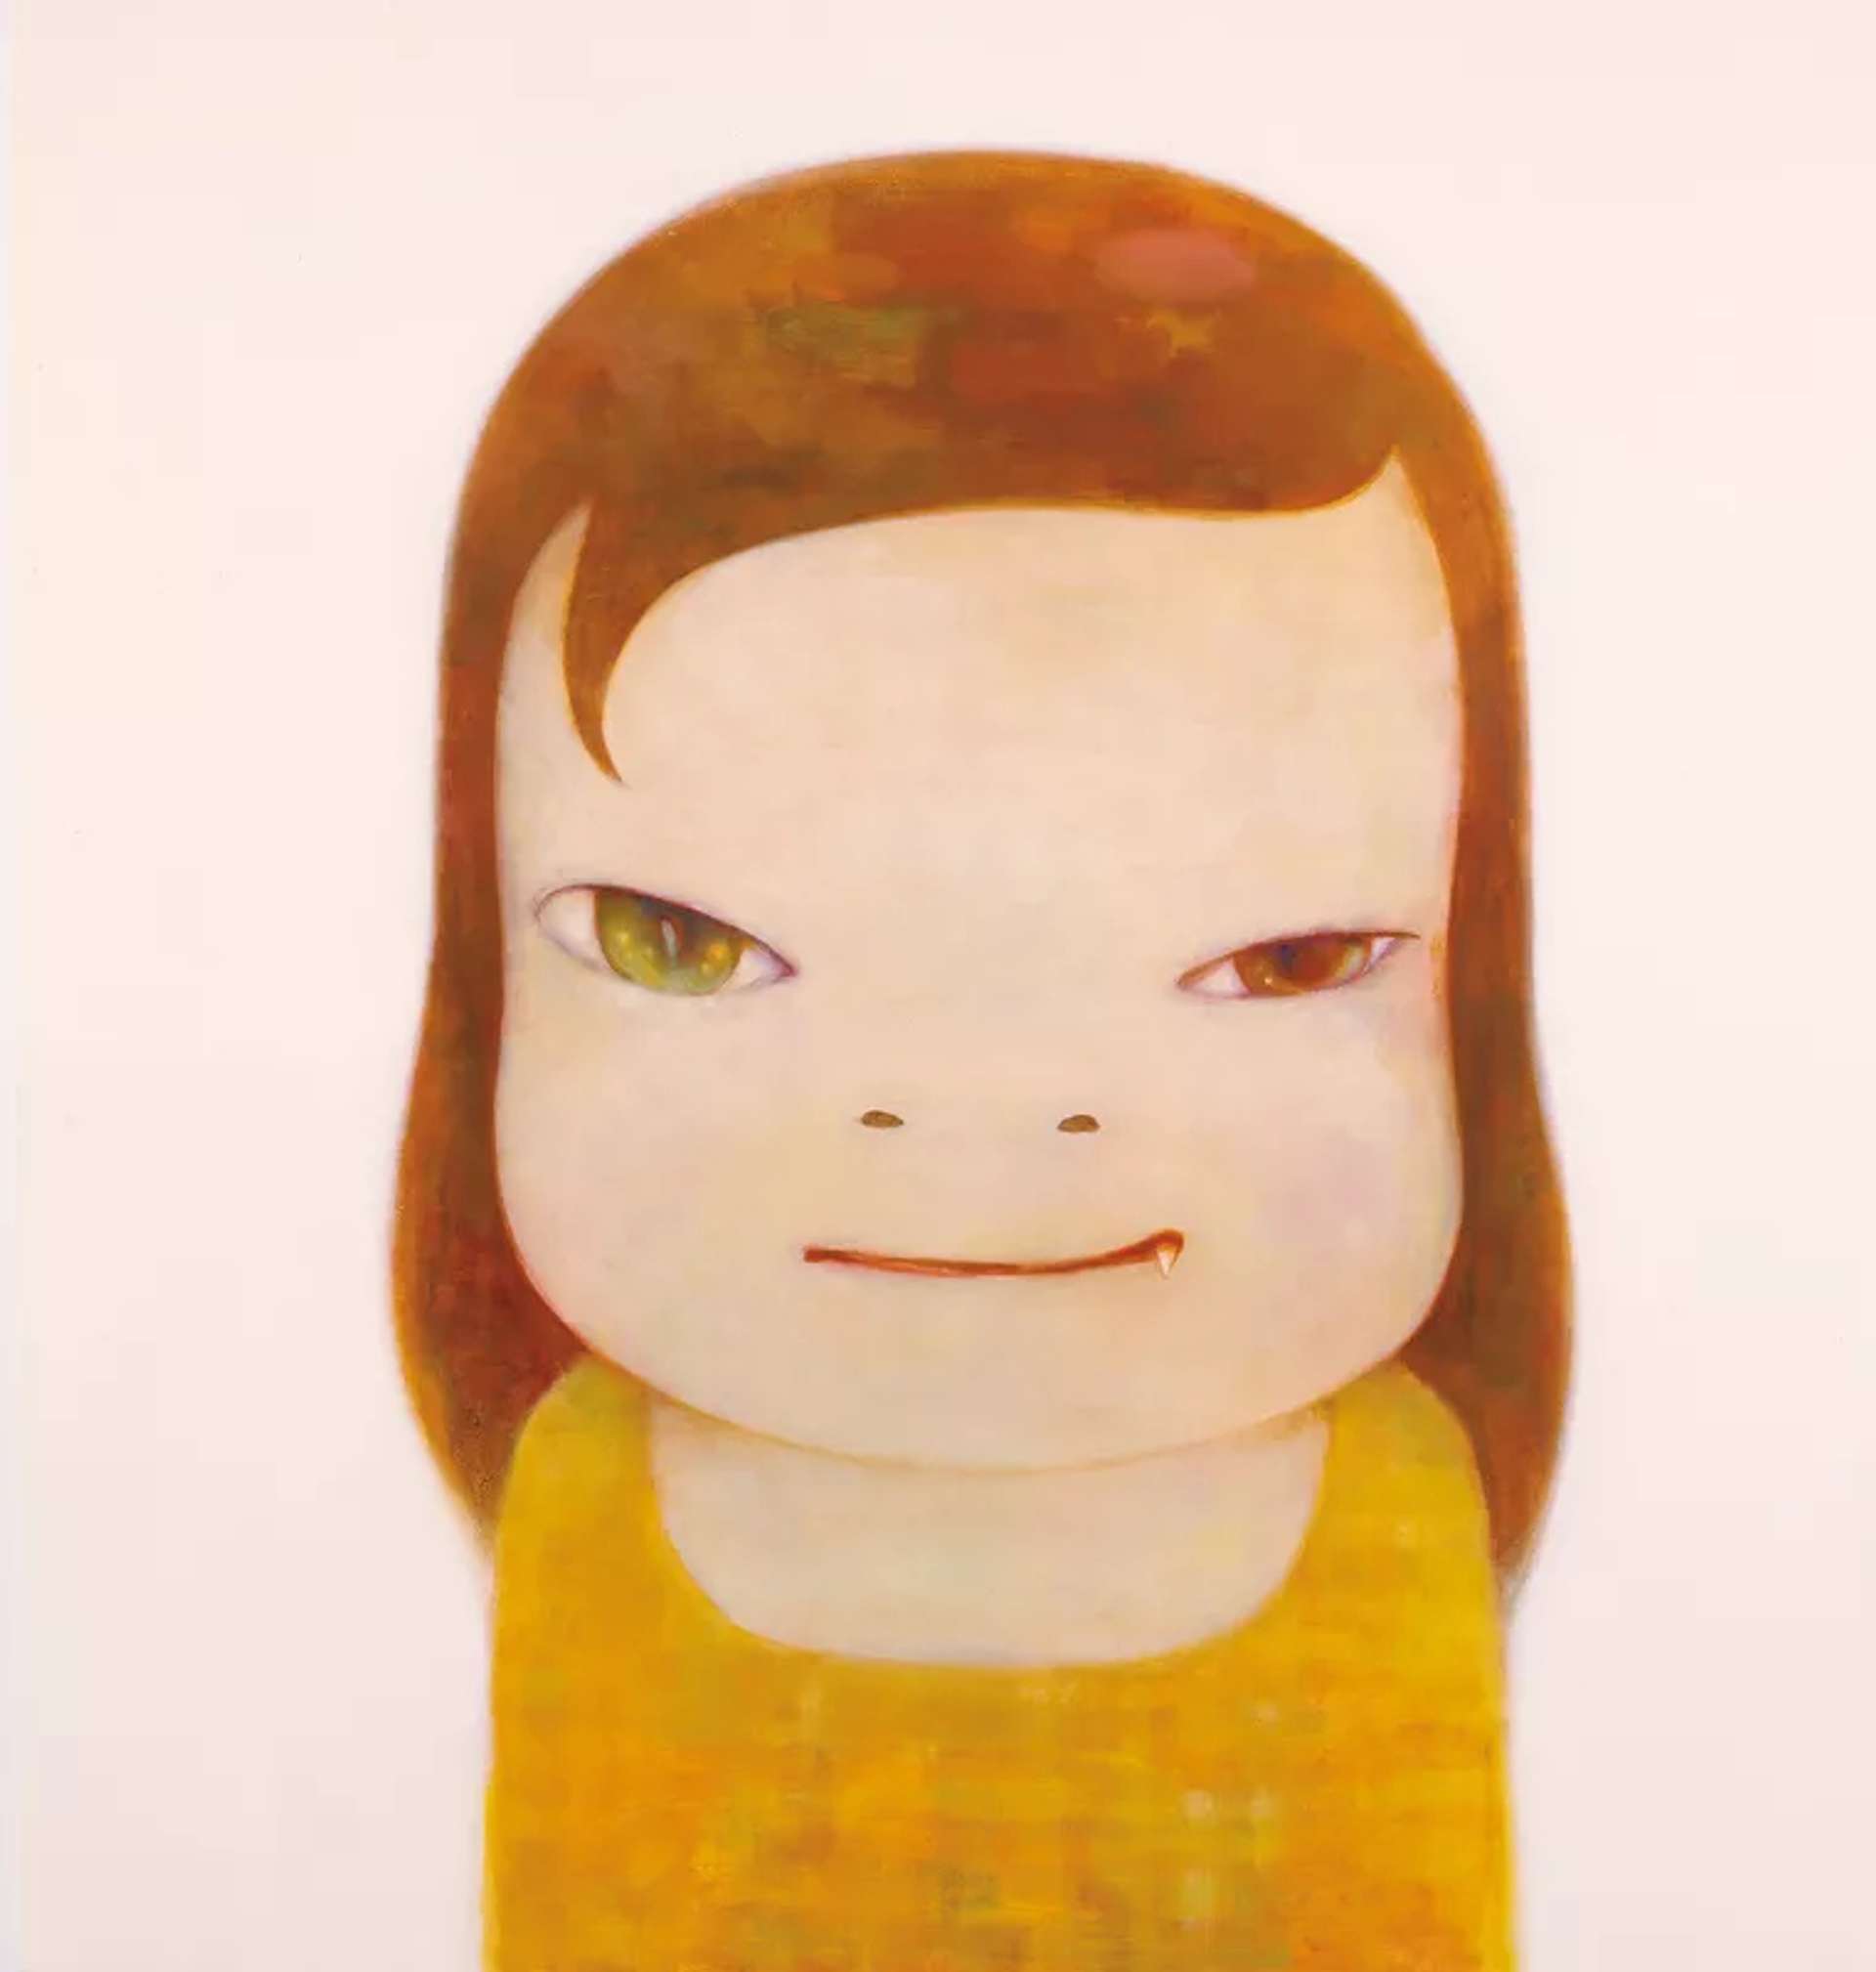 An image of one of Nara's works, showing a girl in a yellow dress staring at the viewer. She has a smirk on her face, out of the corner of which a fang slightly appears.